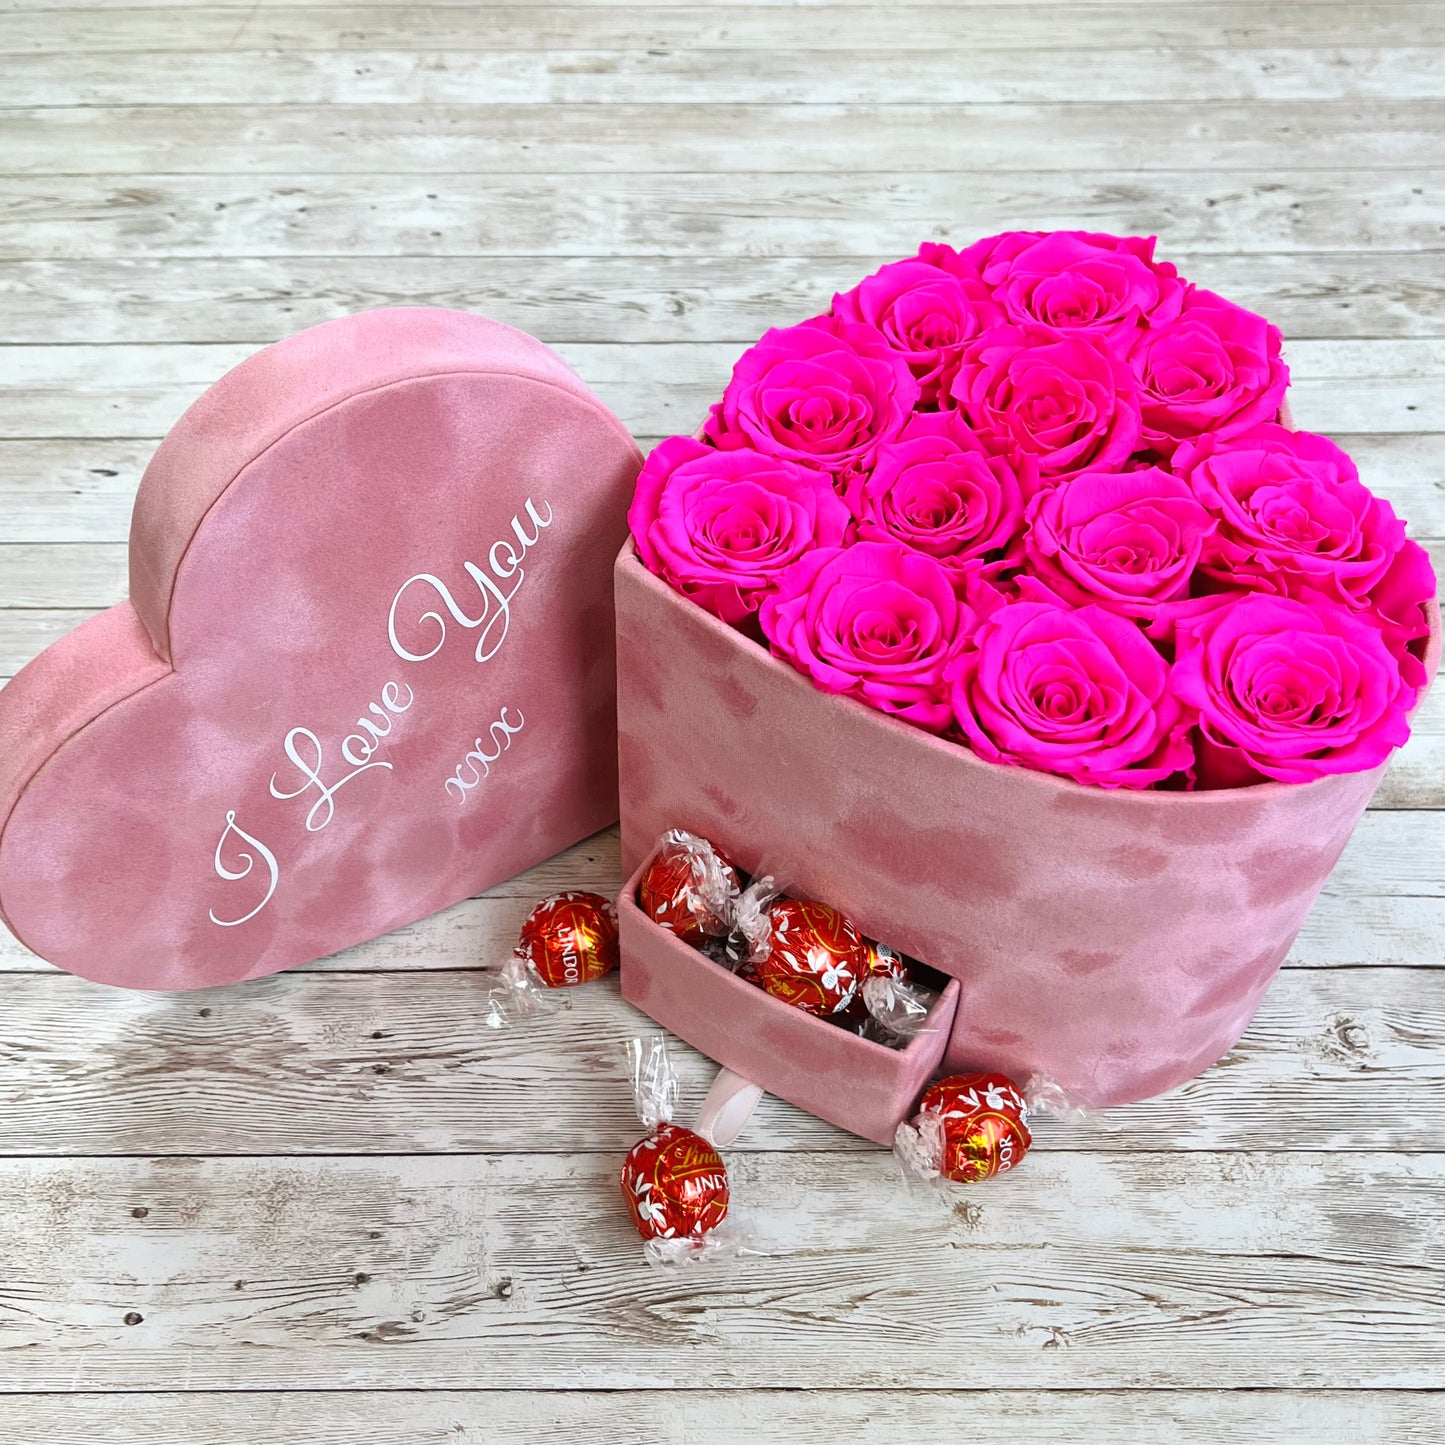 Pink Velvet Heart Infinity Rose Box with chocolates - Shocking Pink One Year Roses 